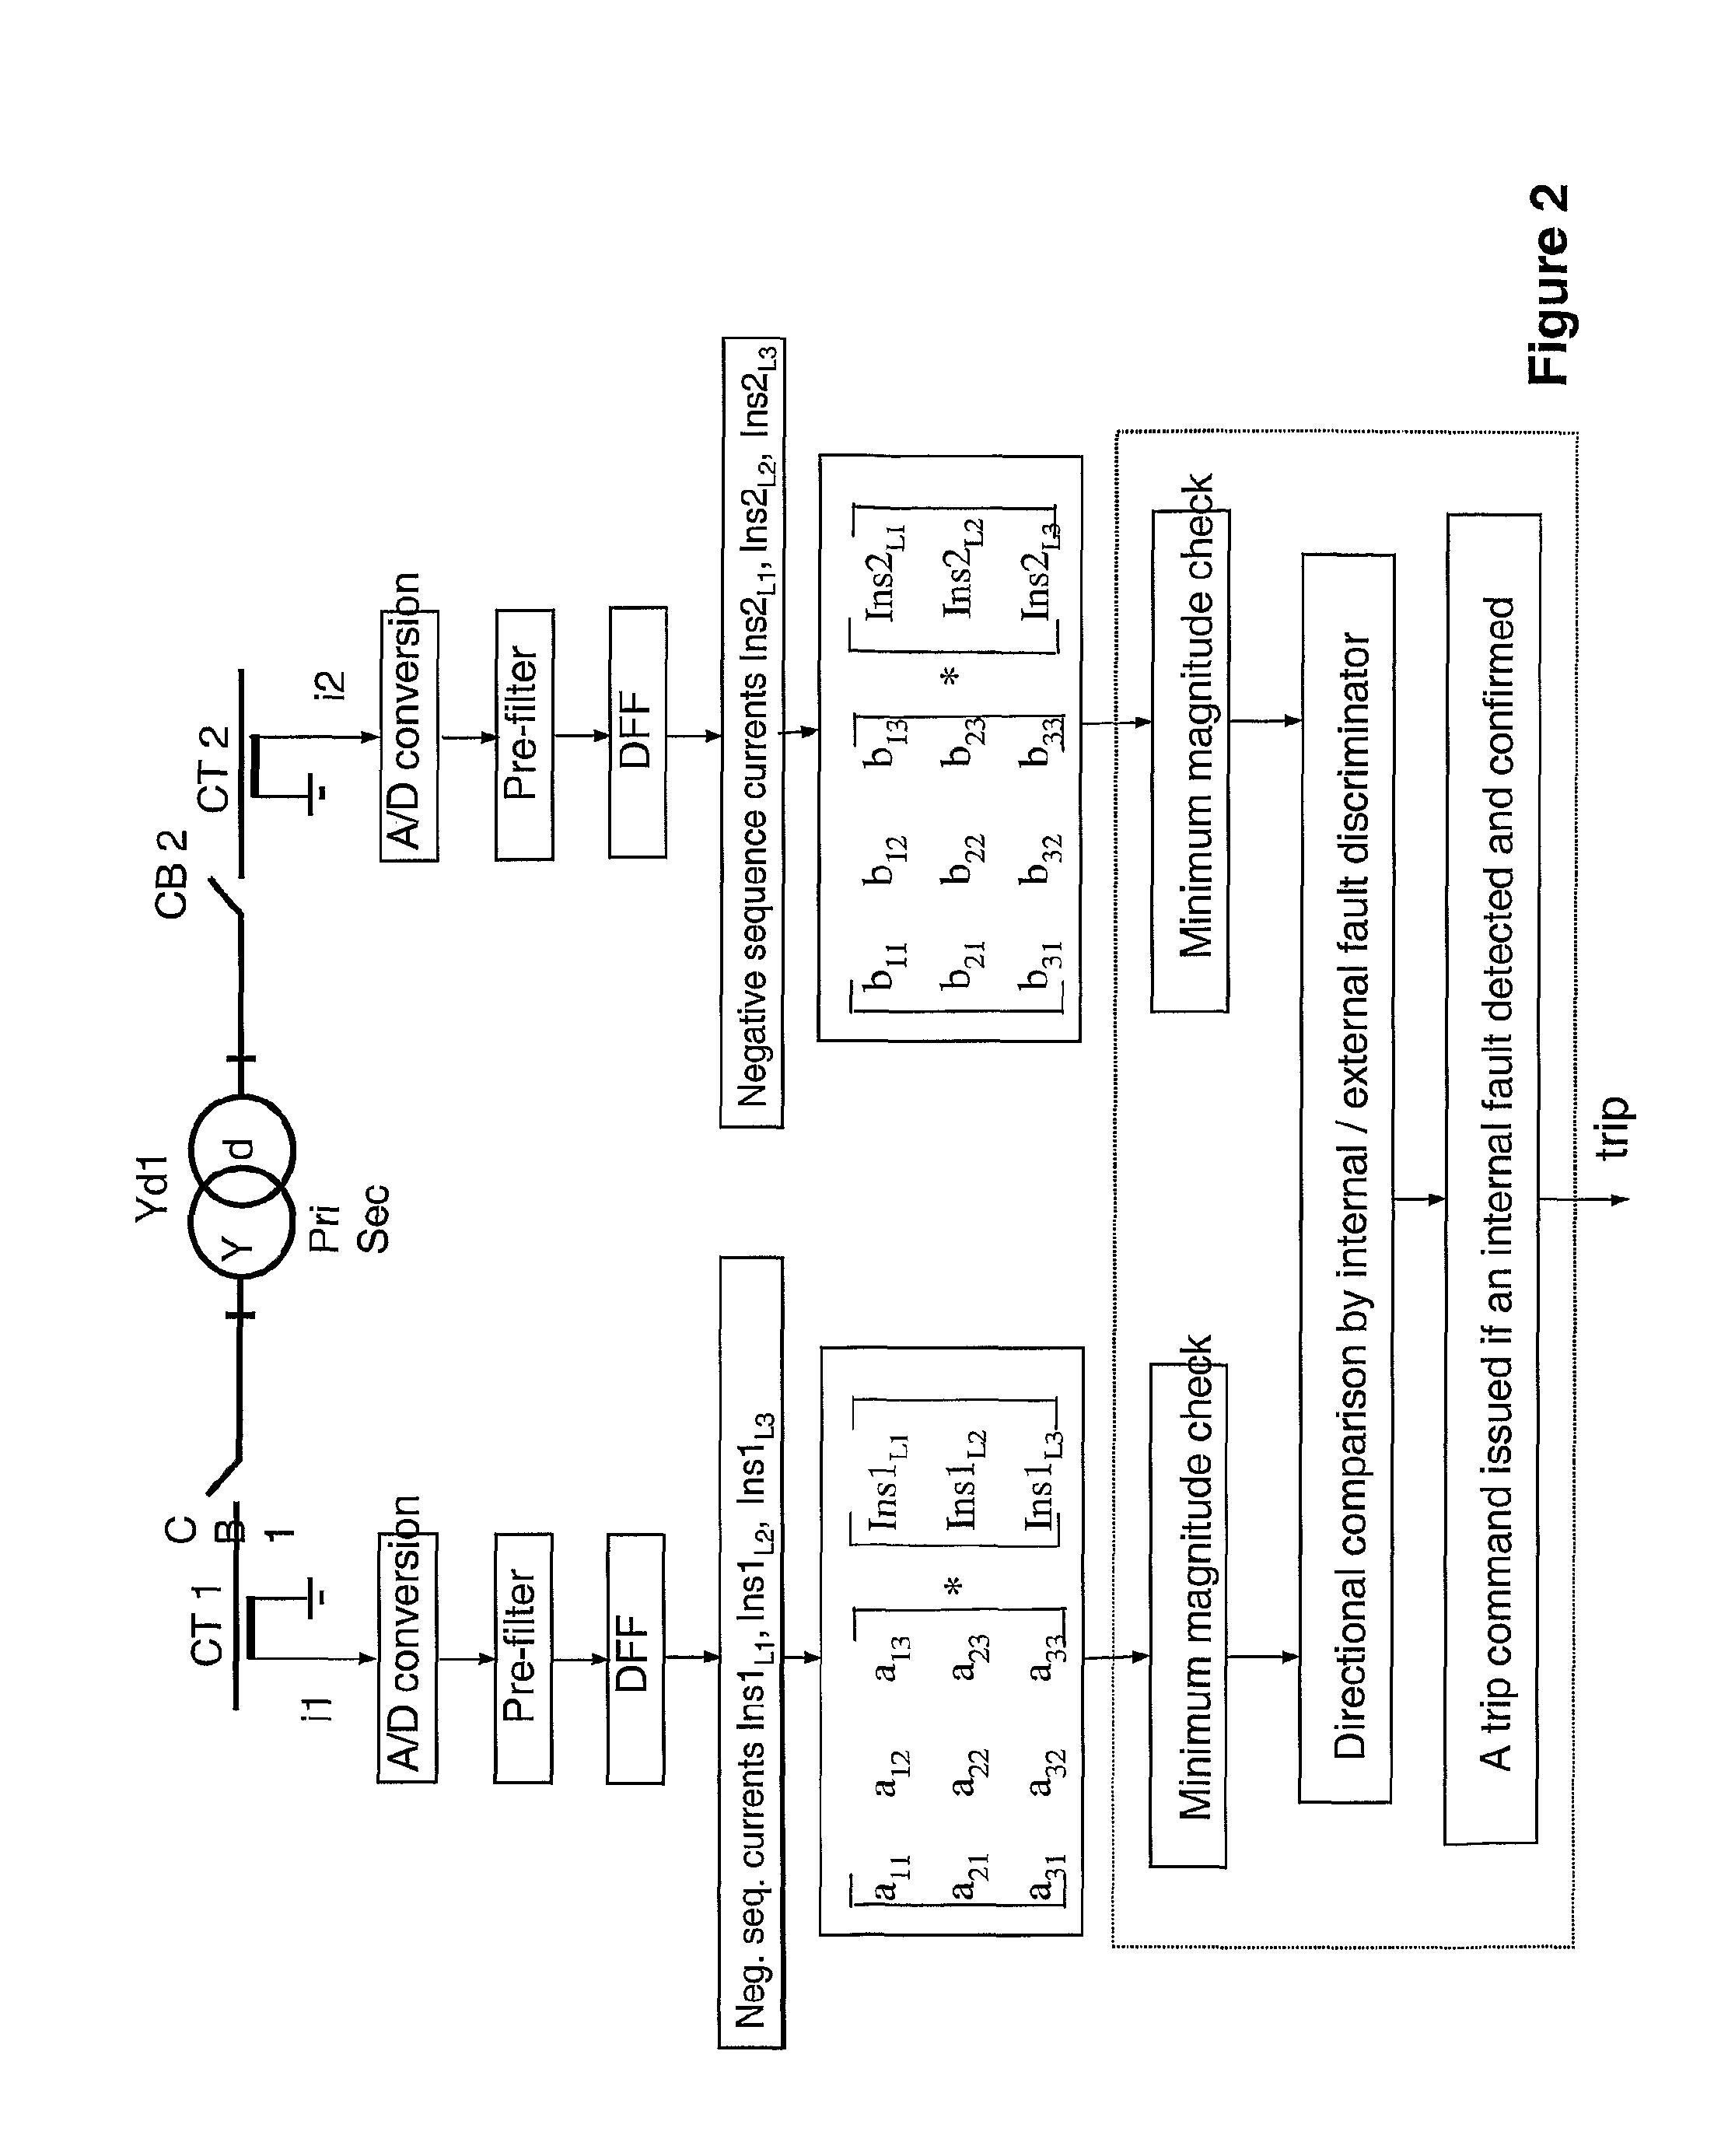 Method and device for fault detection in transformers or power lines